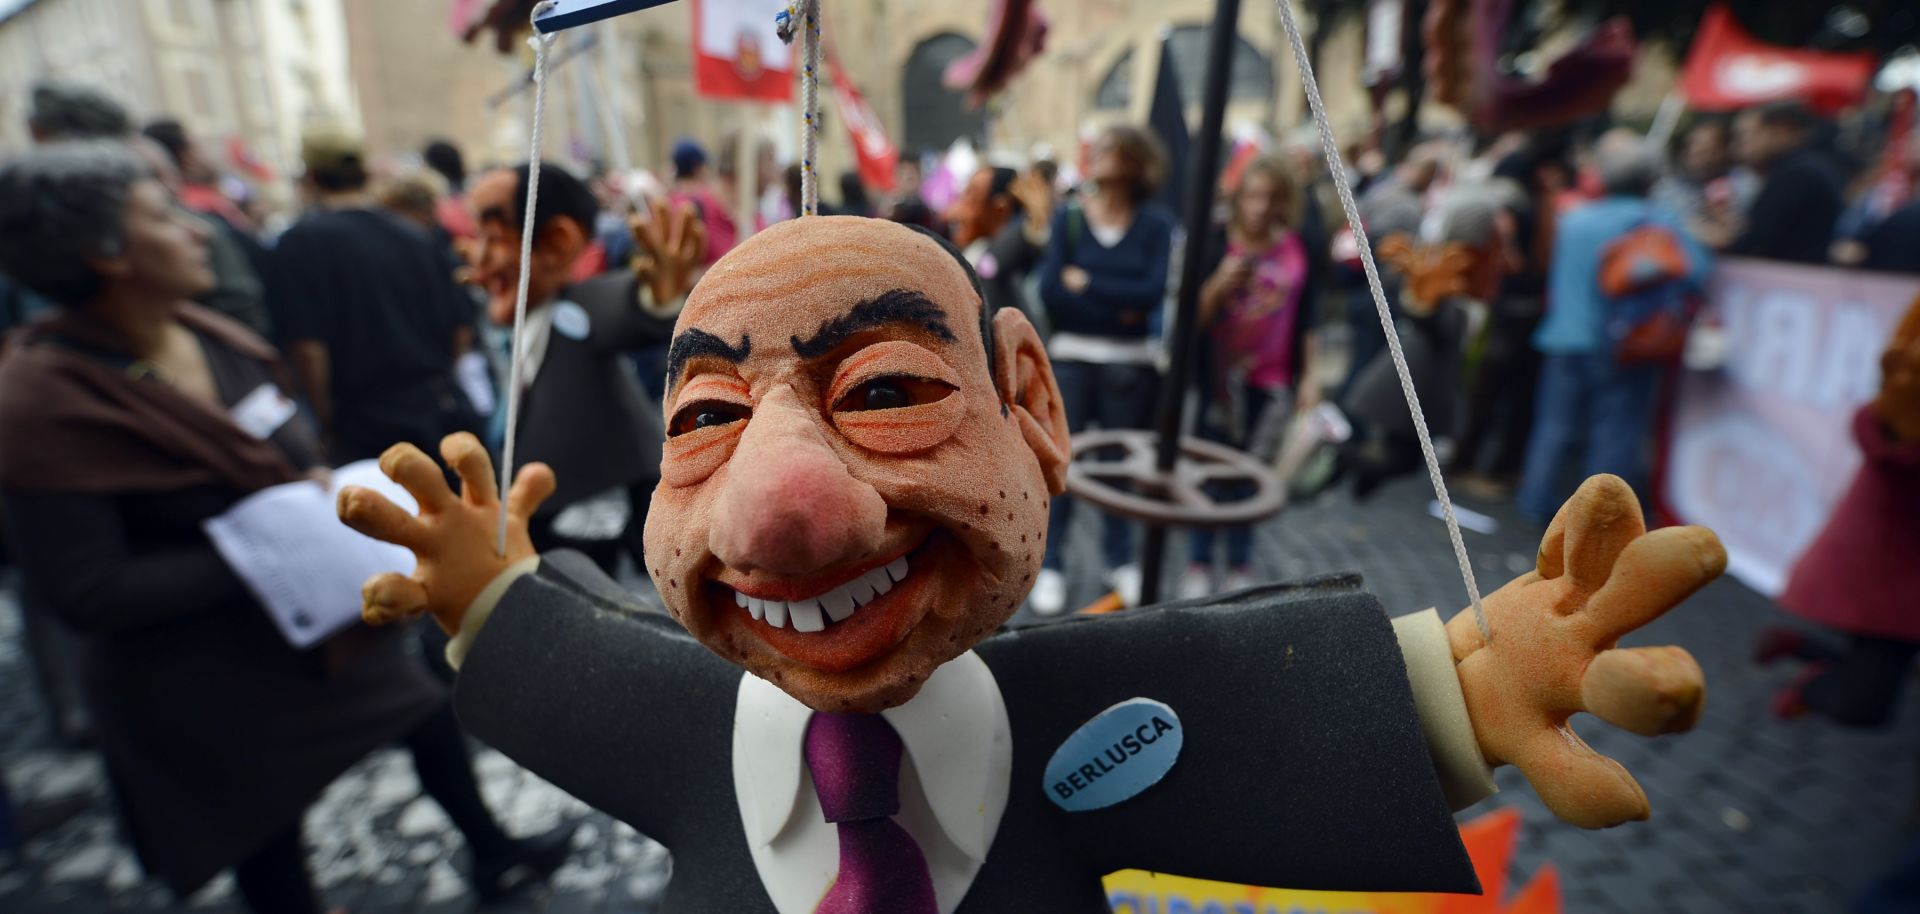 A puppet showing former Italian Prime Minister Silvio Berlusconi is displayed at the start of the No Monti Day demonstration on October 27, 2012 in Rome. 